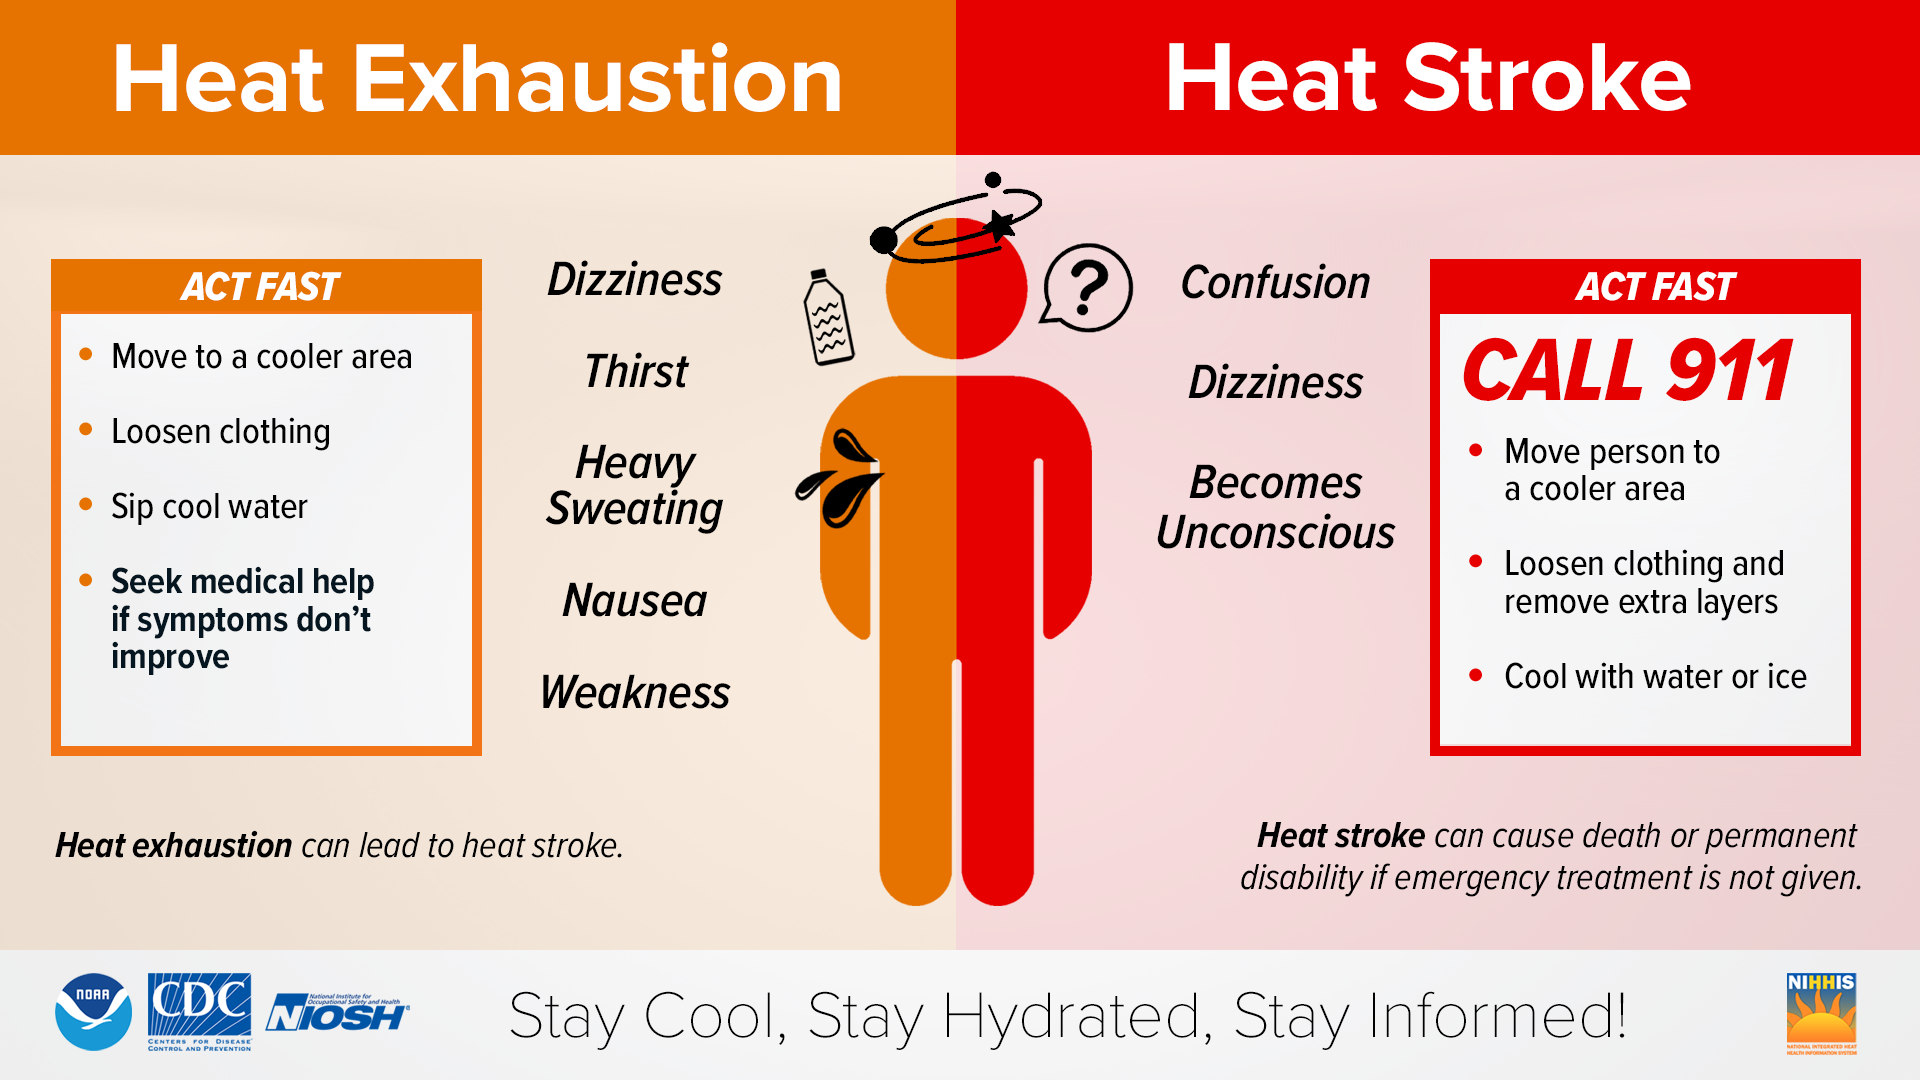 A graphic showing the signs of heat exhaustion and heatstroke, and what to do if they are detected.